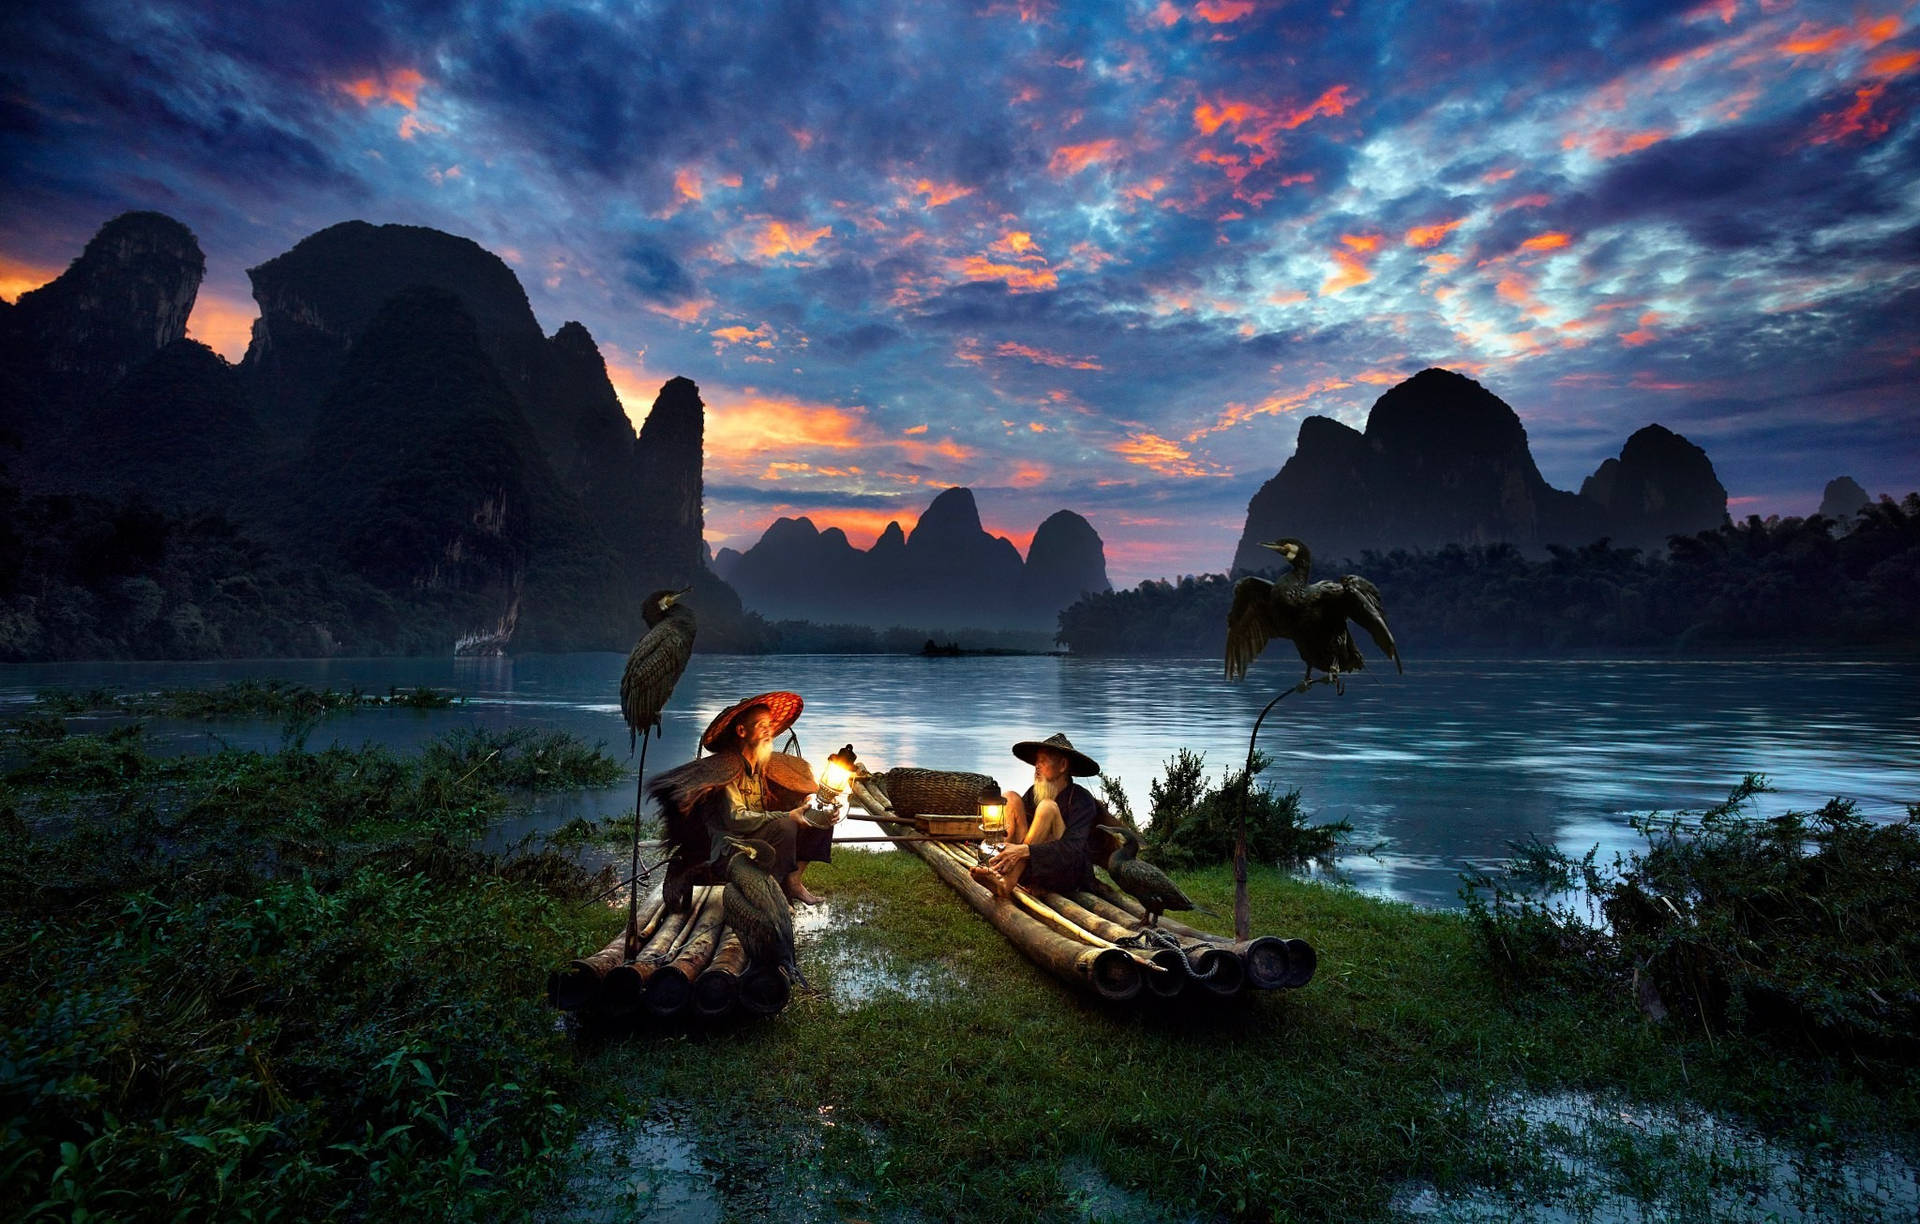 Two People On Boats With Birds In Nature